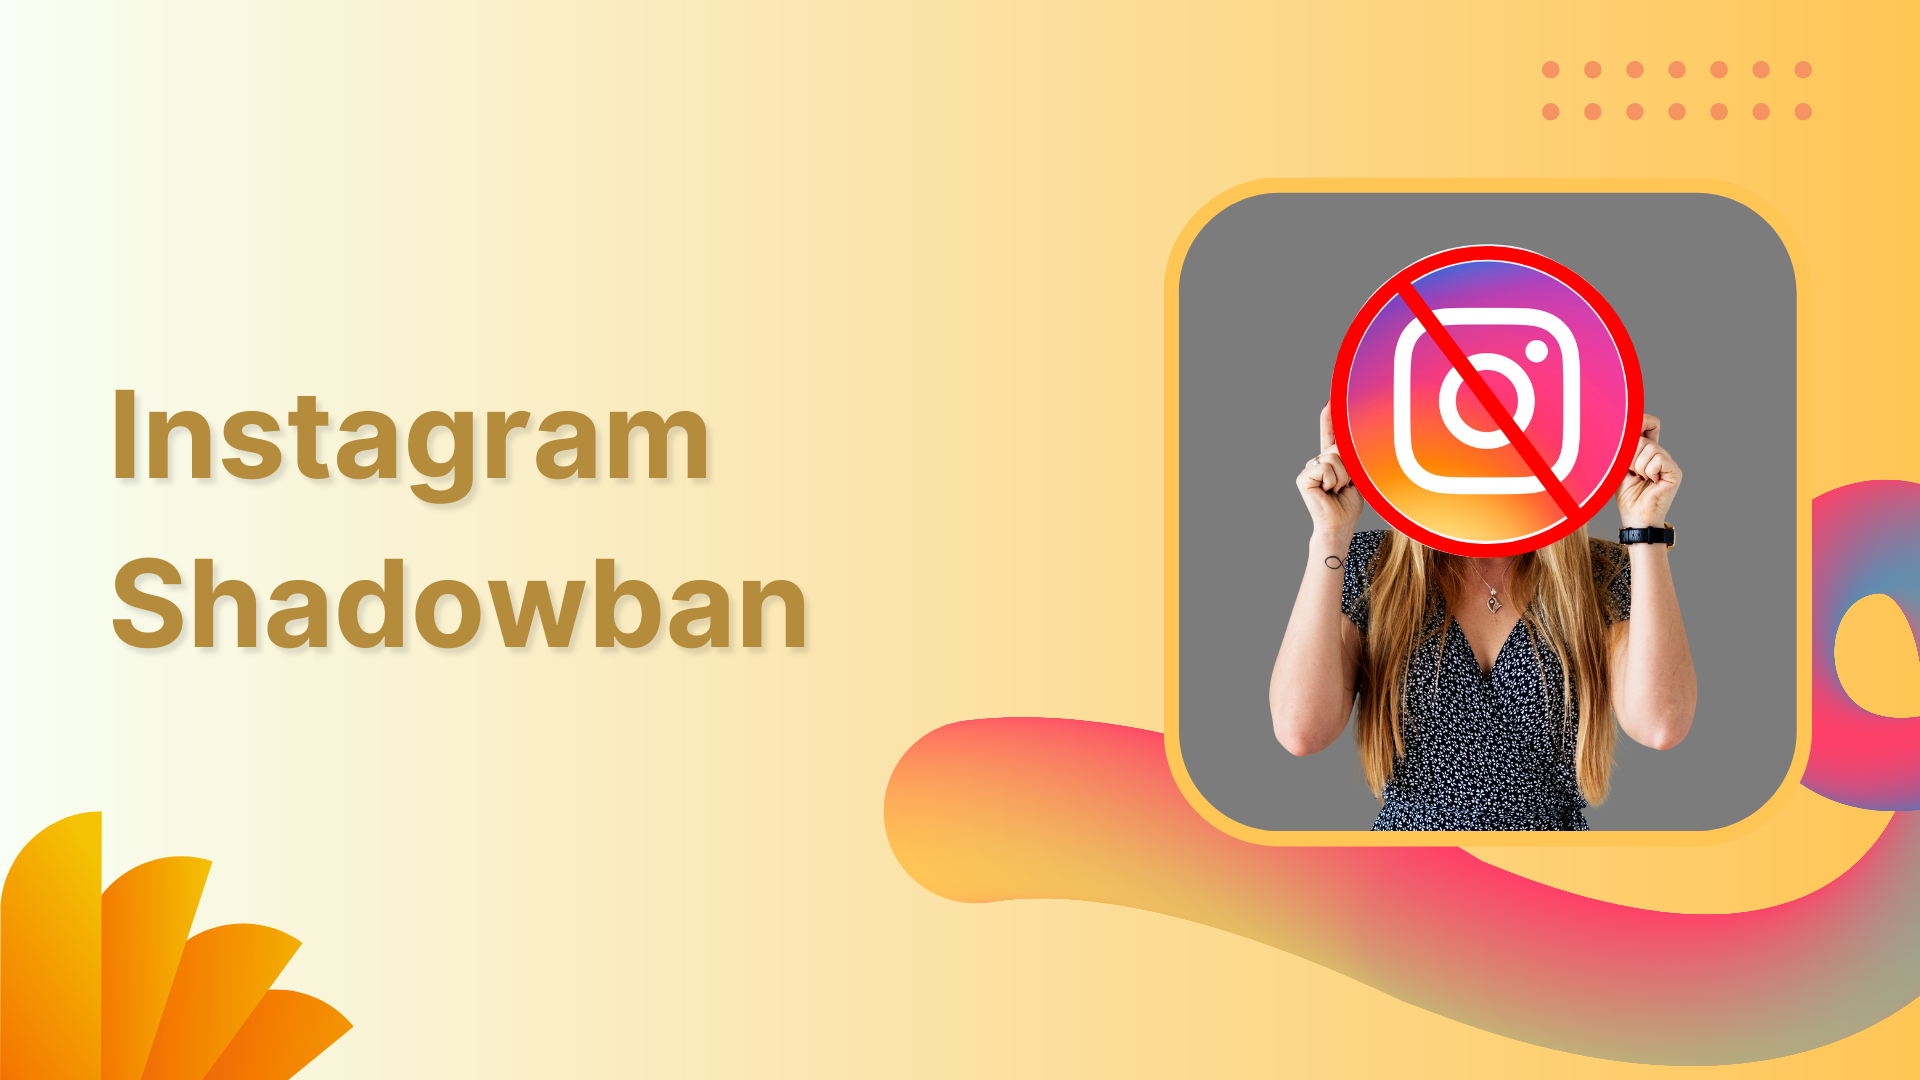 Instagram Shadowban: What Is It and How to Get Out of It?